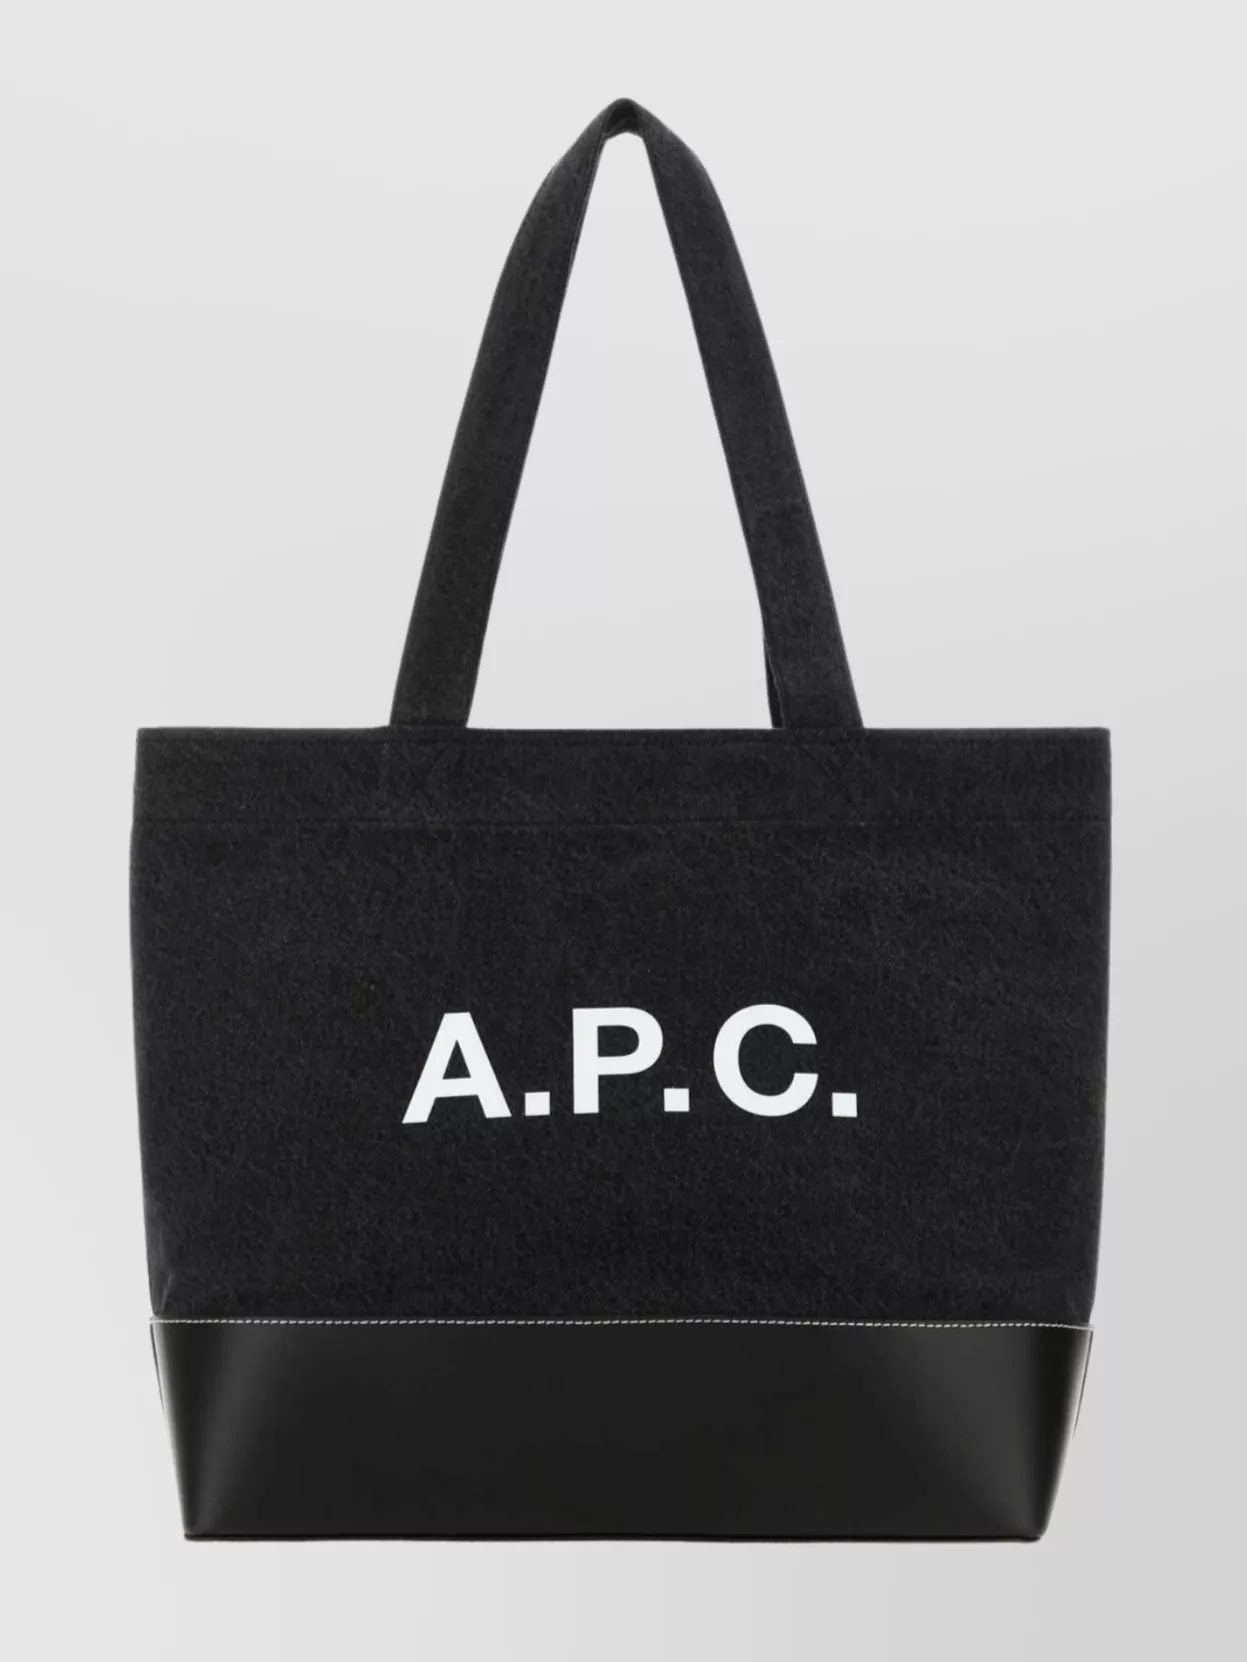 Shop Apc Rectangular Shape Tote Bag With Two-tone Design And Top Handles